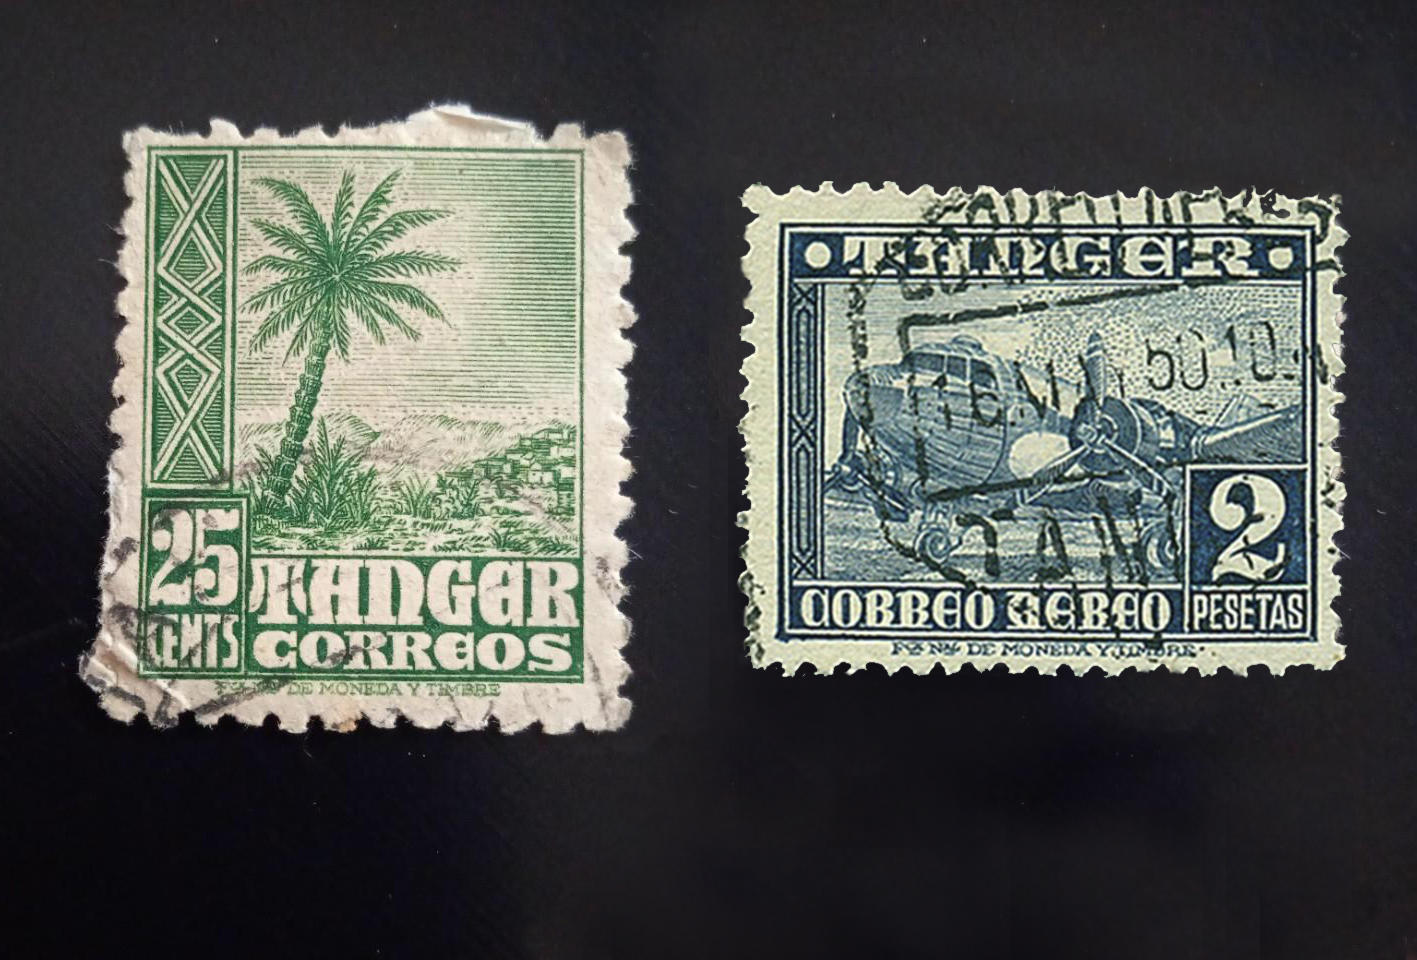 Colonial stamps issued by the Spanish Mail Office in Tangier, 1948- 1951, color print on paper. Source: StampBears Worldwide Forum